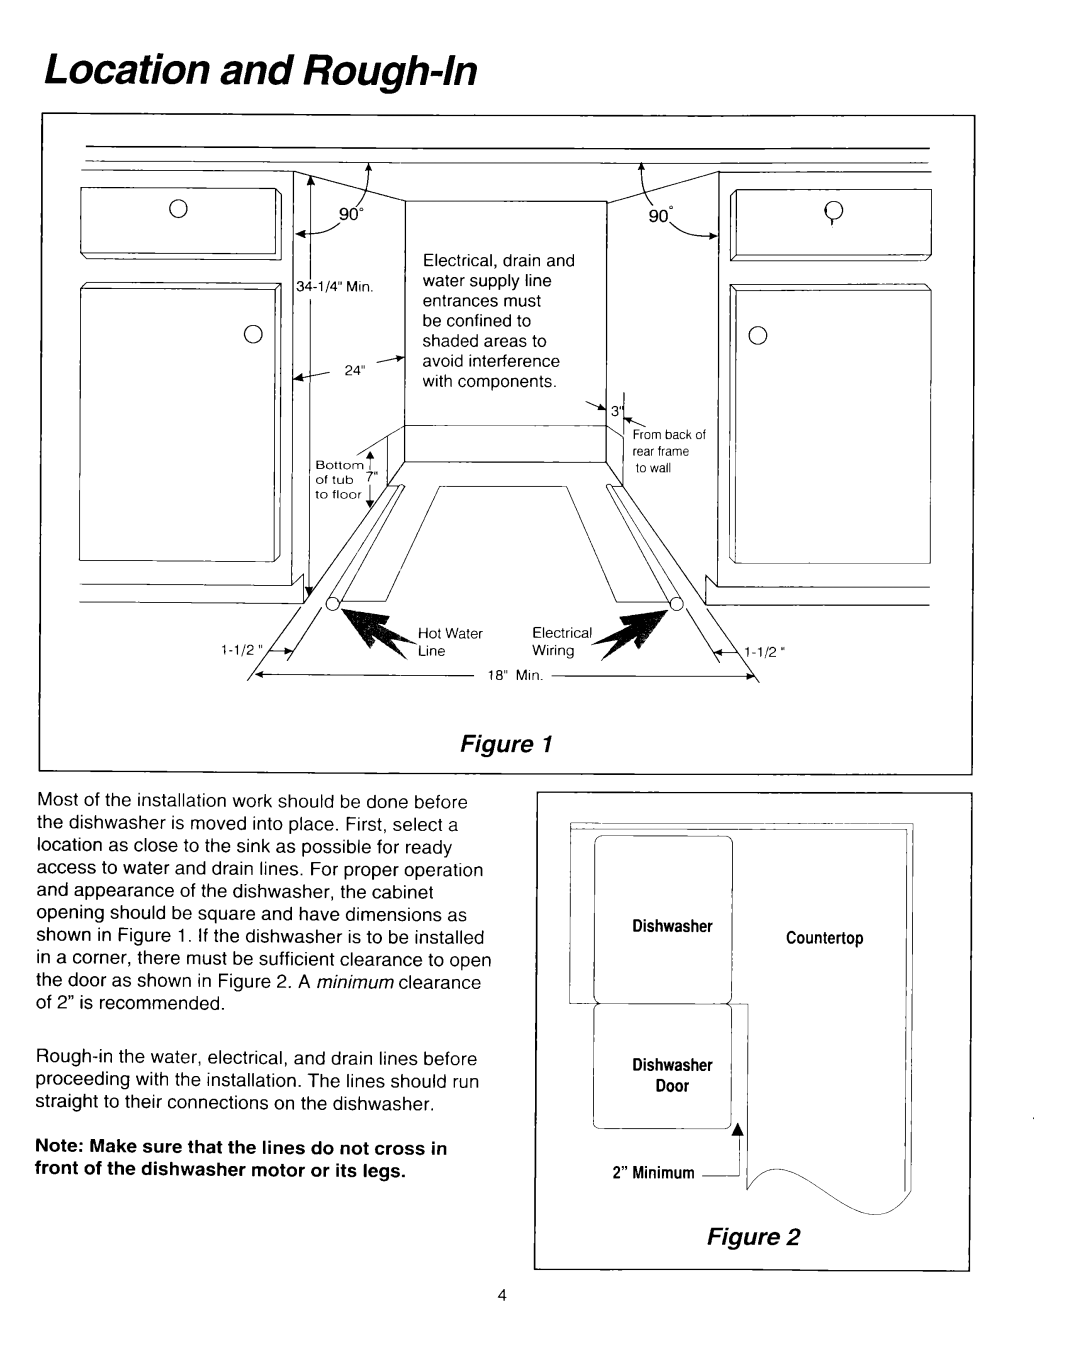 Whirlpool RUD0800EB installation instructions Location and Rough-In 